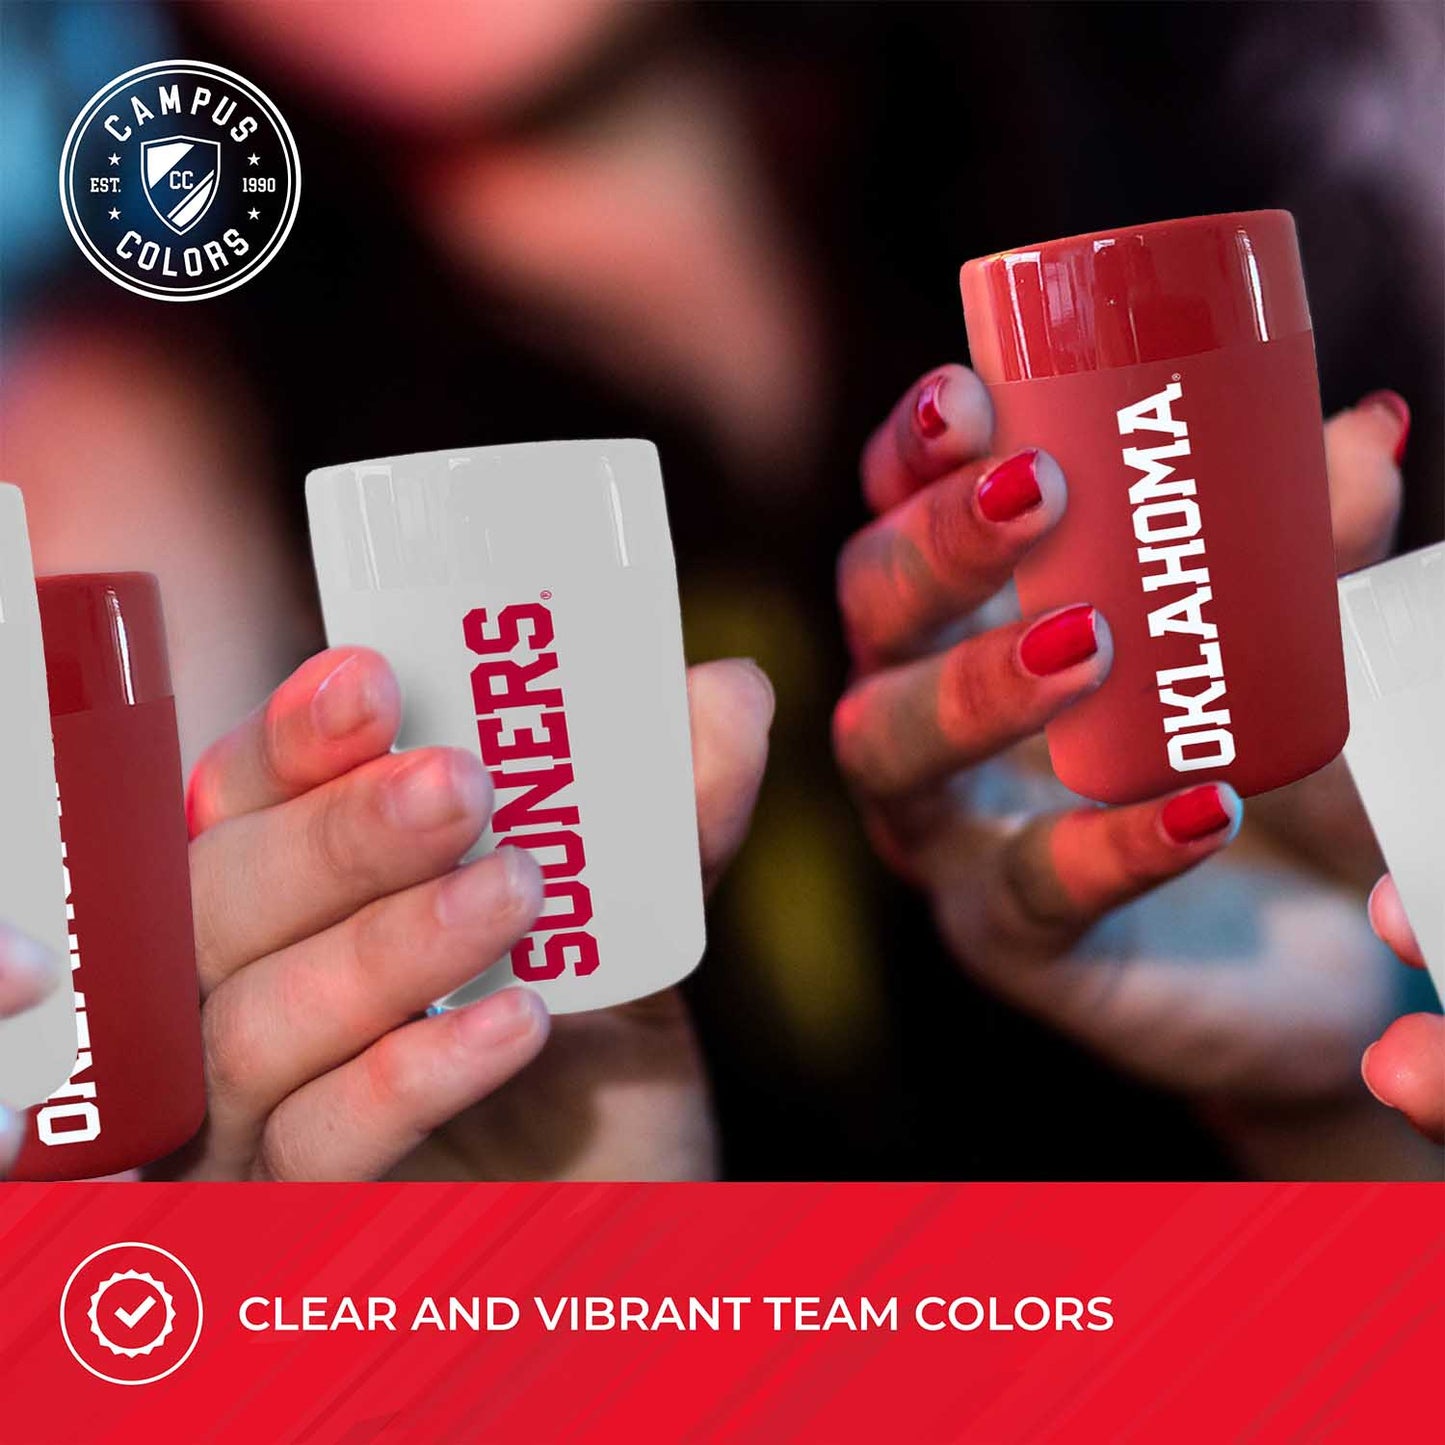 Oklahoma Sooners College and University 2-Pack Shot Glasses - Team Color